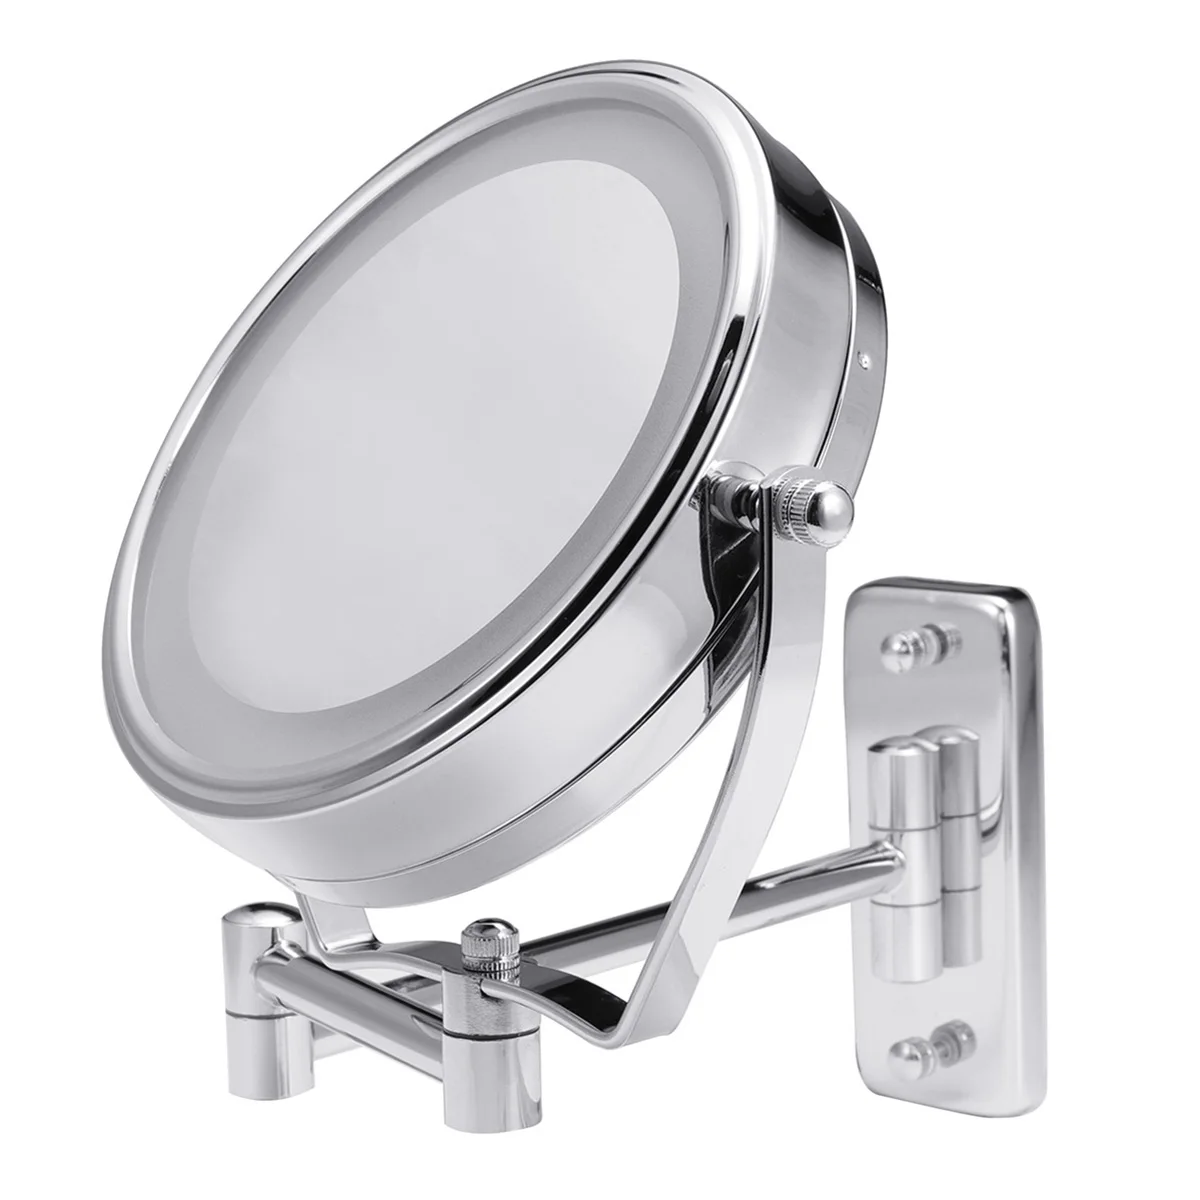 6" Diameter Bathroom Shaving Makeup Mirror With LED Lights Wall Mount Two Sides Extendable Rotate Cosmetic Mirror Magnifying 7X Sadoun.com